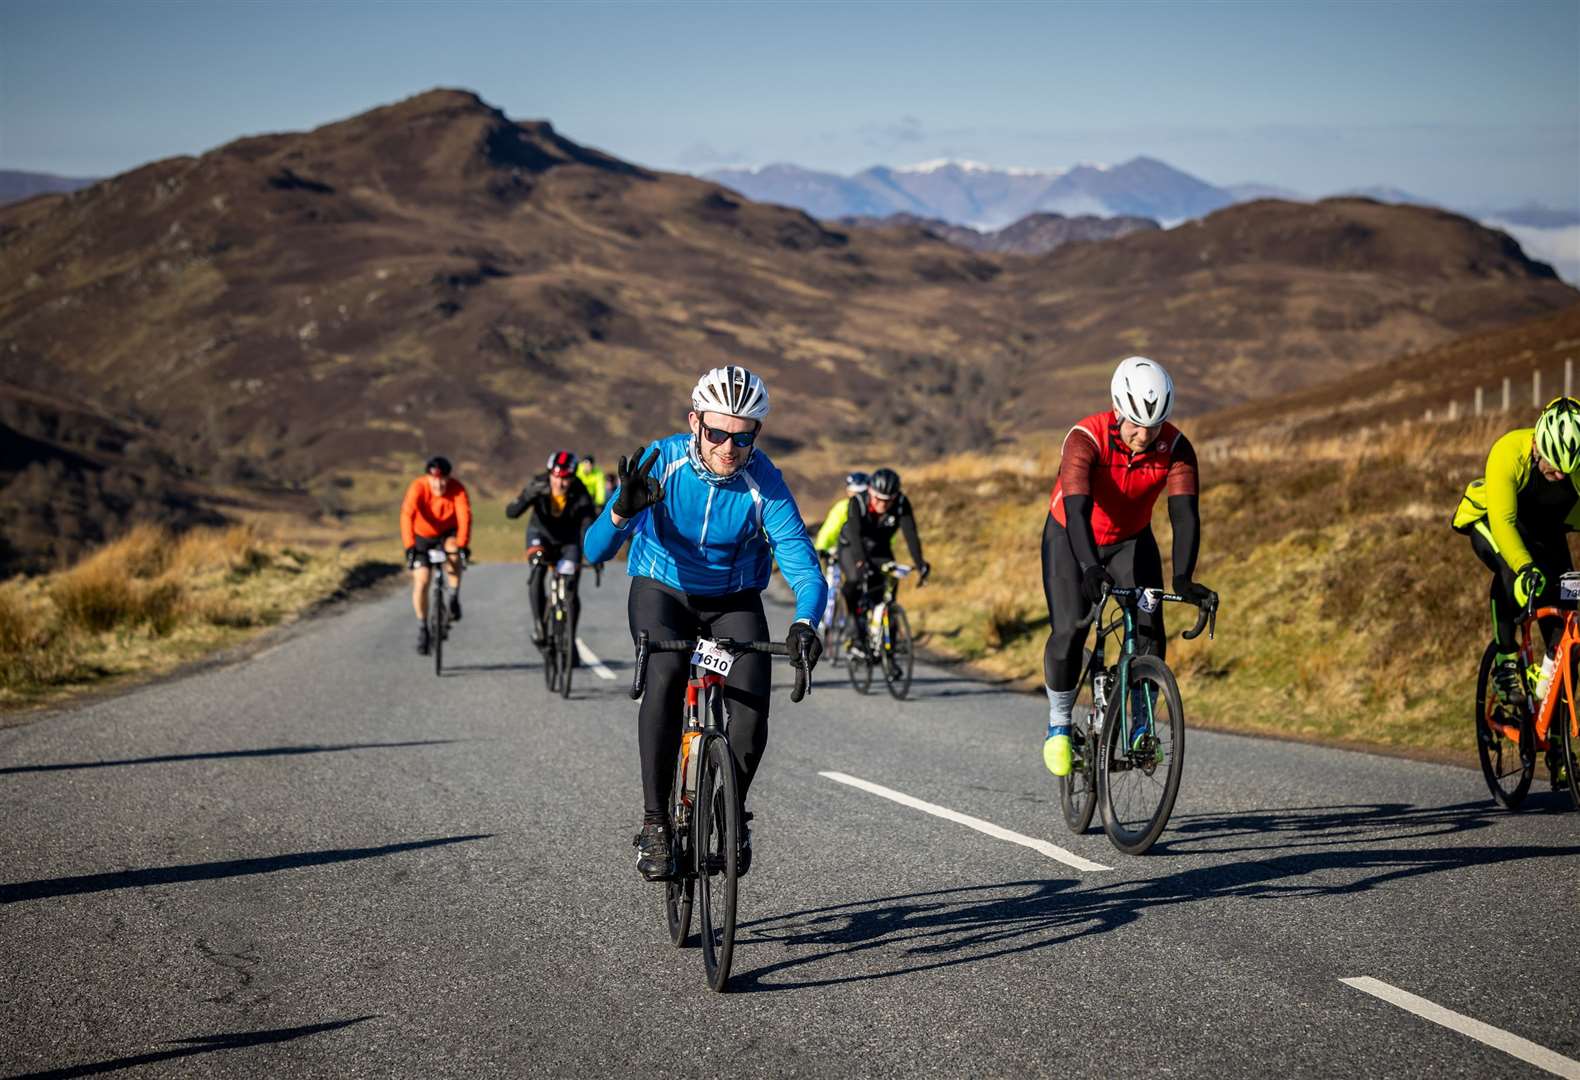 Approaching the summit of the Suidhe hill during the Etape Loch Ness.